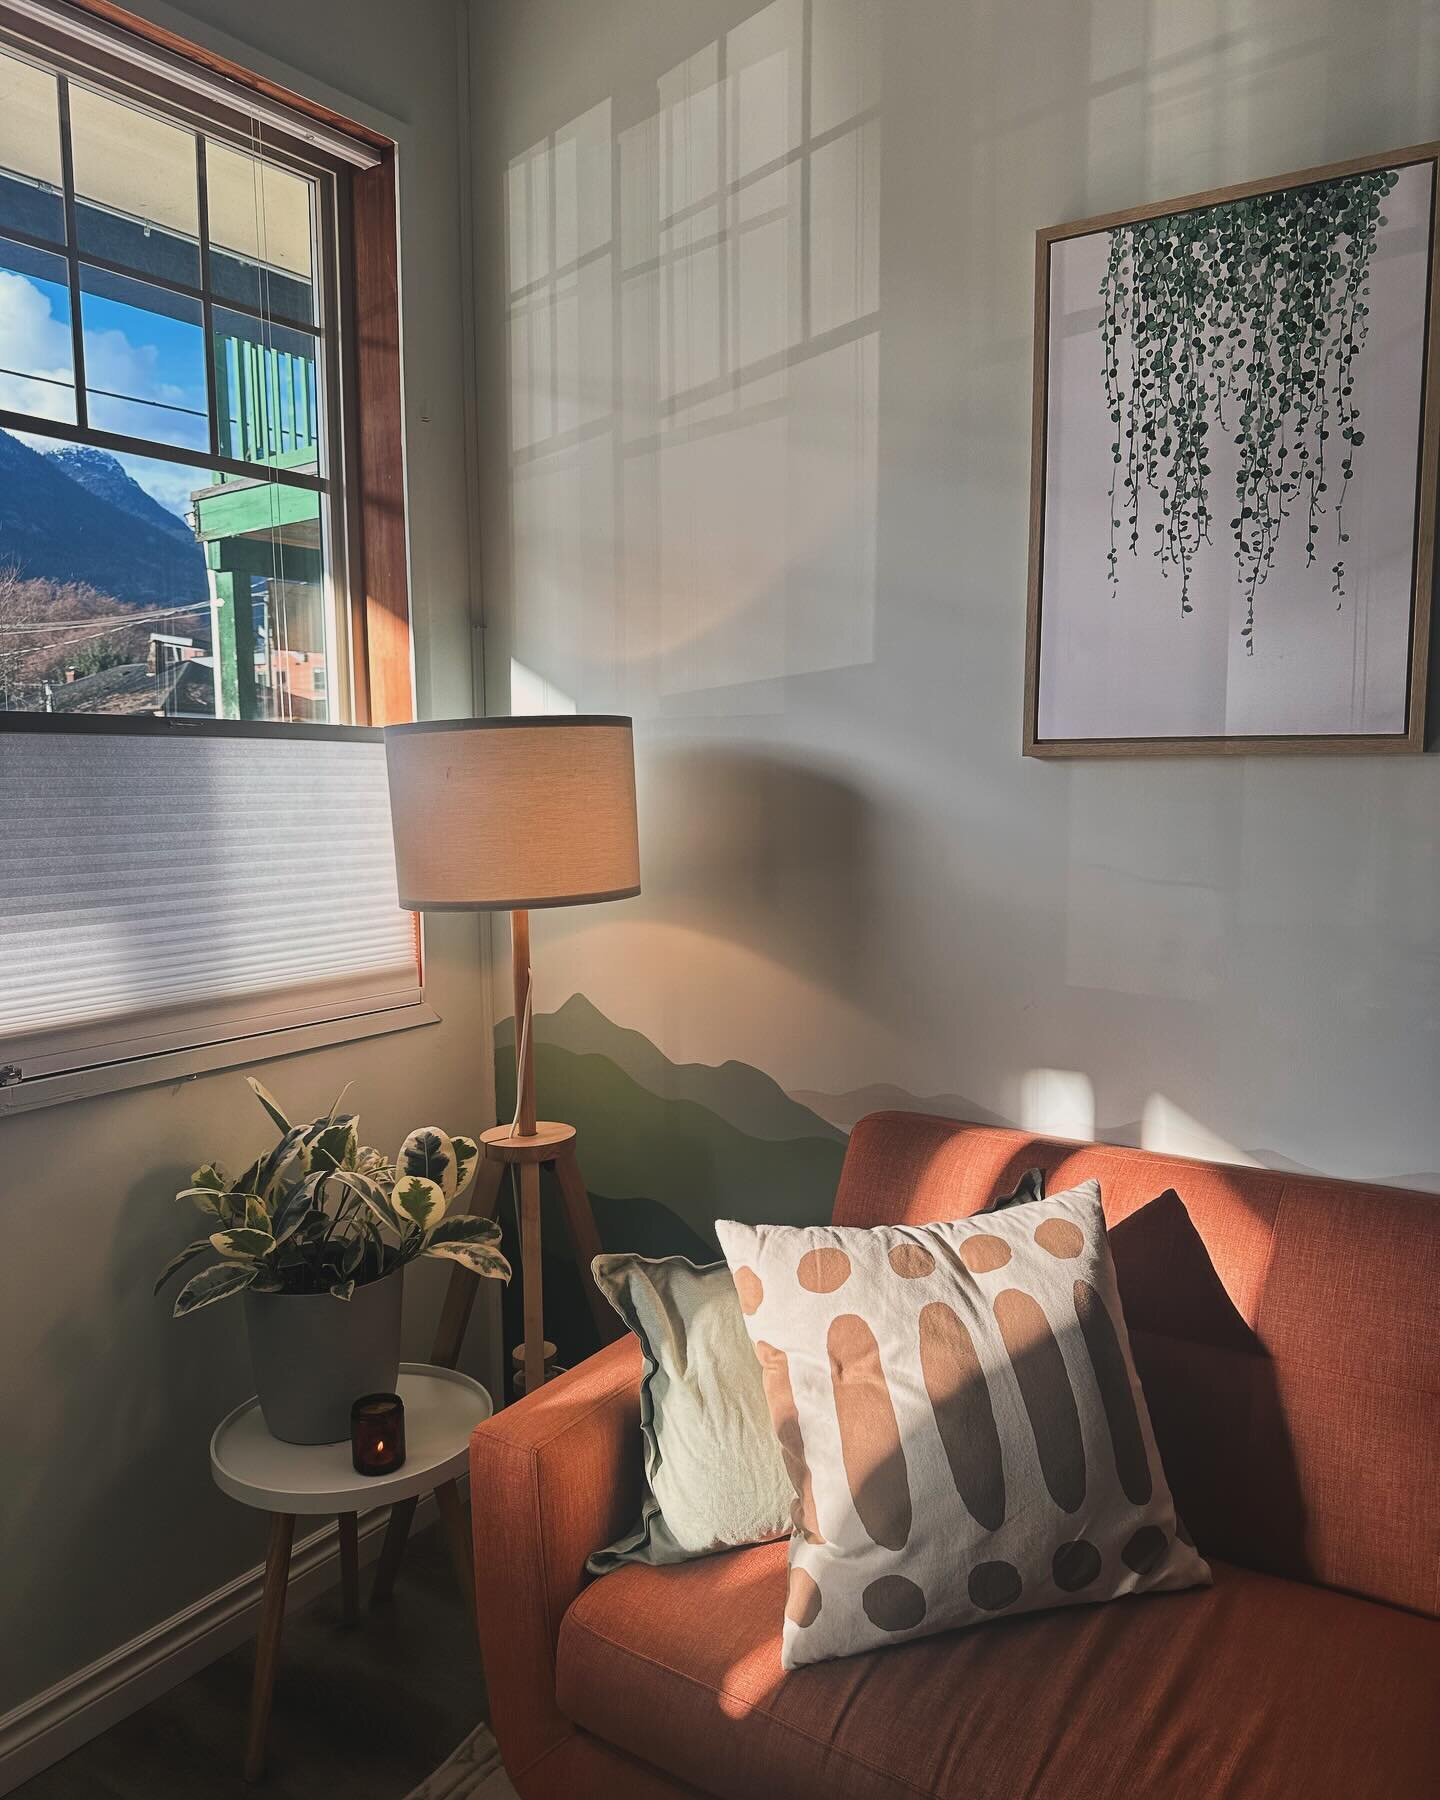 A sunlit corner in the cozy Squamish counselling office ✨